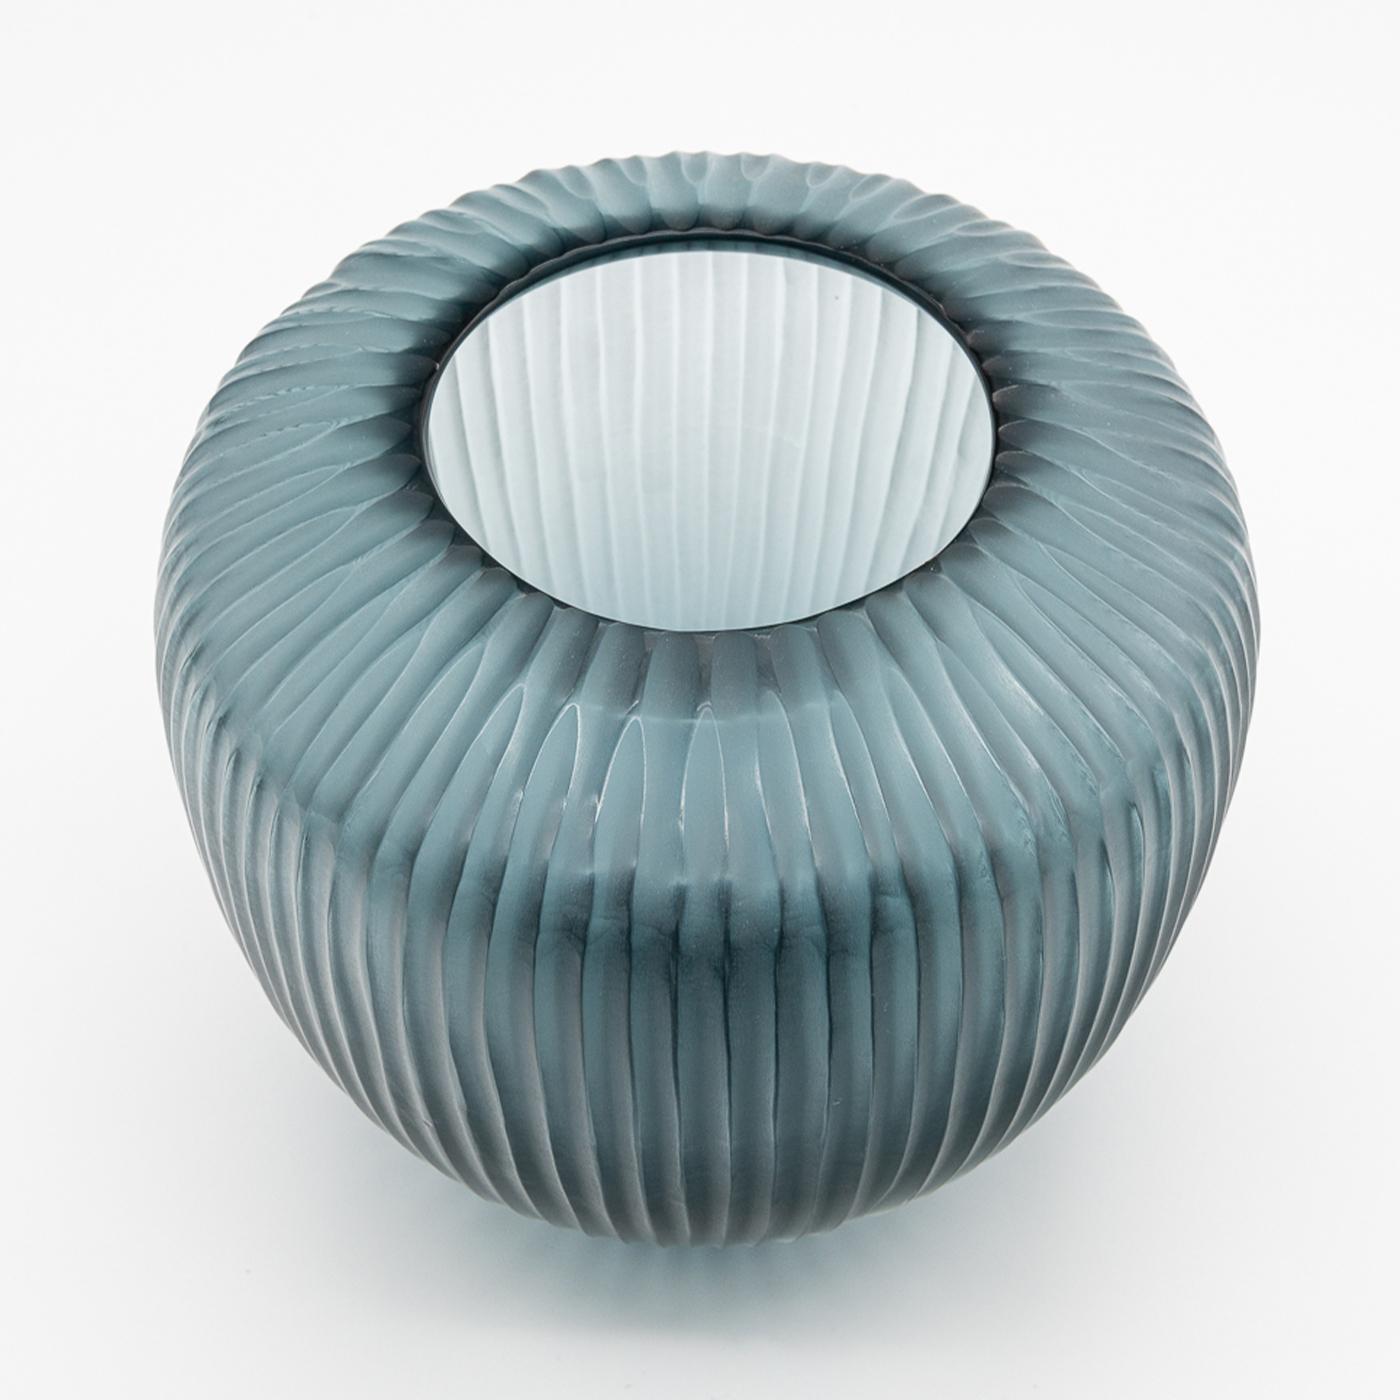 Inspired by Greek and Roman amphorae, this unique vase takes its name from the Italian word for drop, expressed through its elegant elongated form. Hand-finished using traditional Muranese cold carving and polishing techniques to enhance the